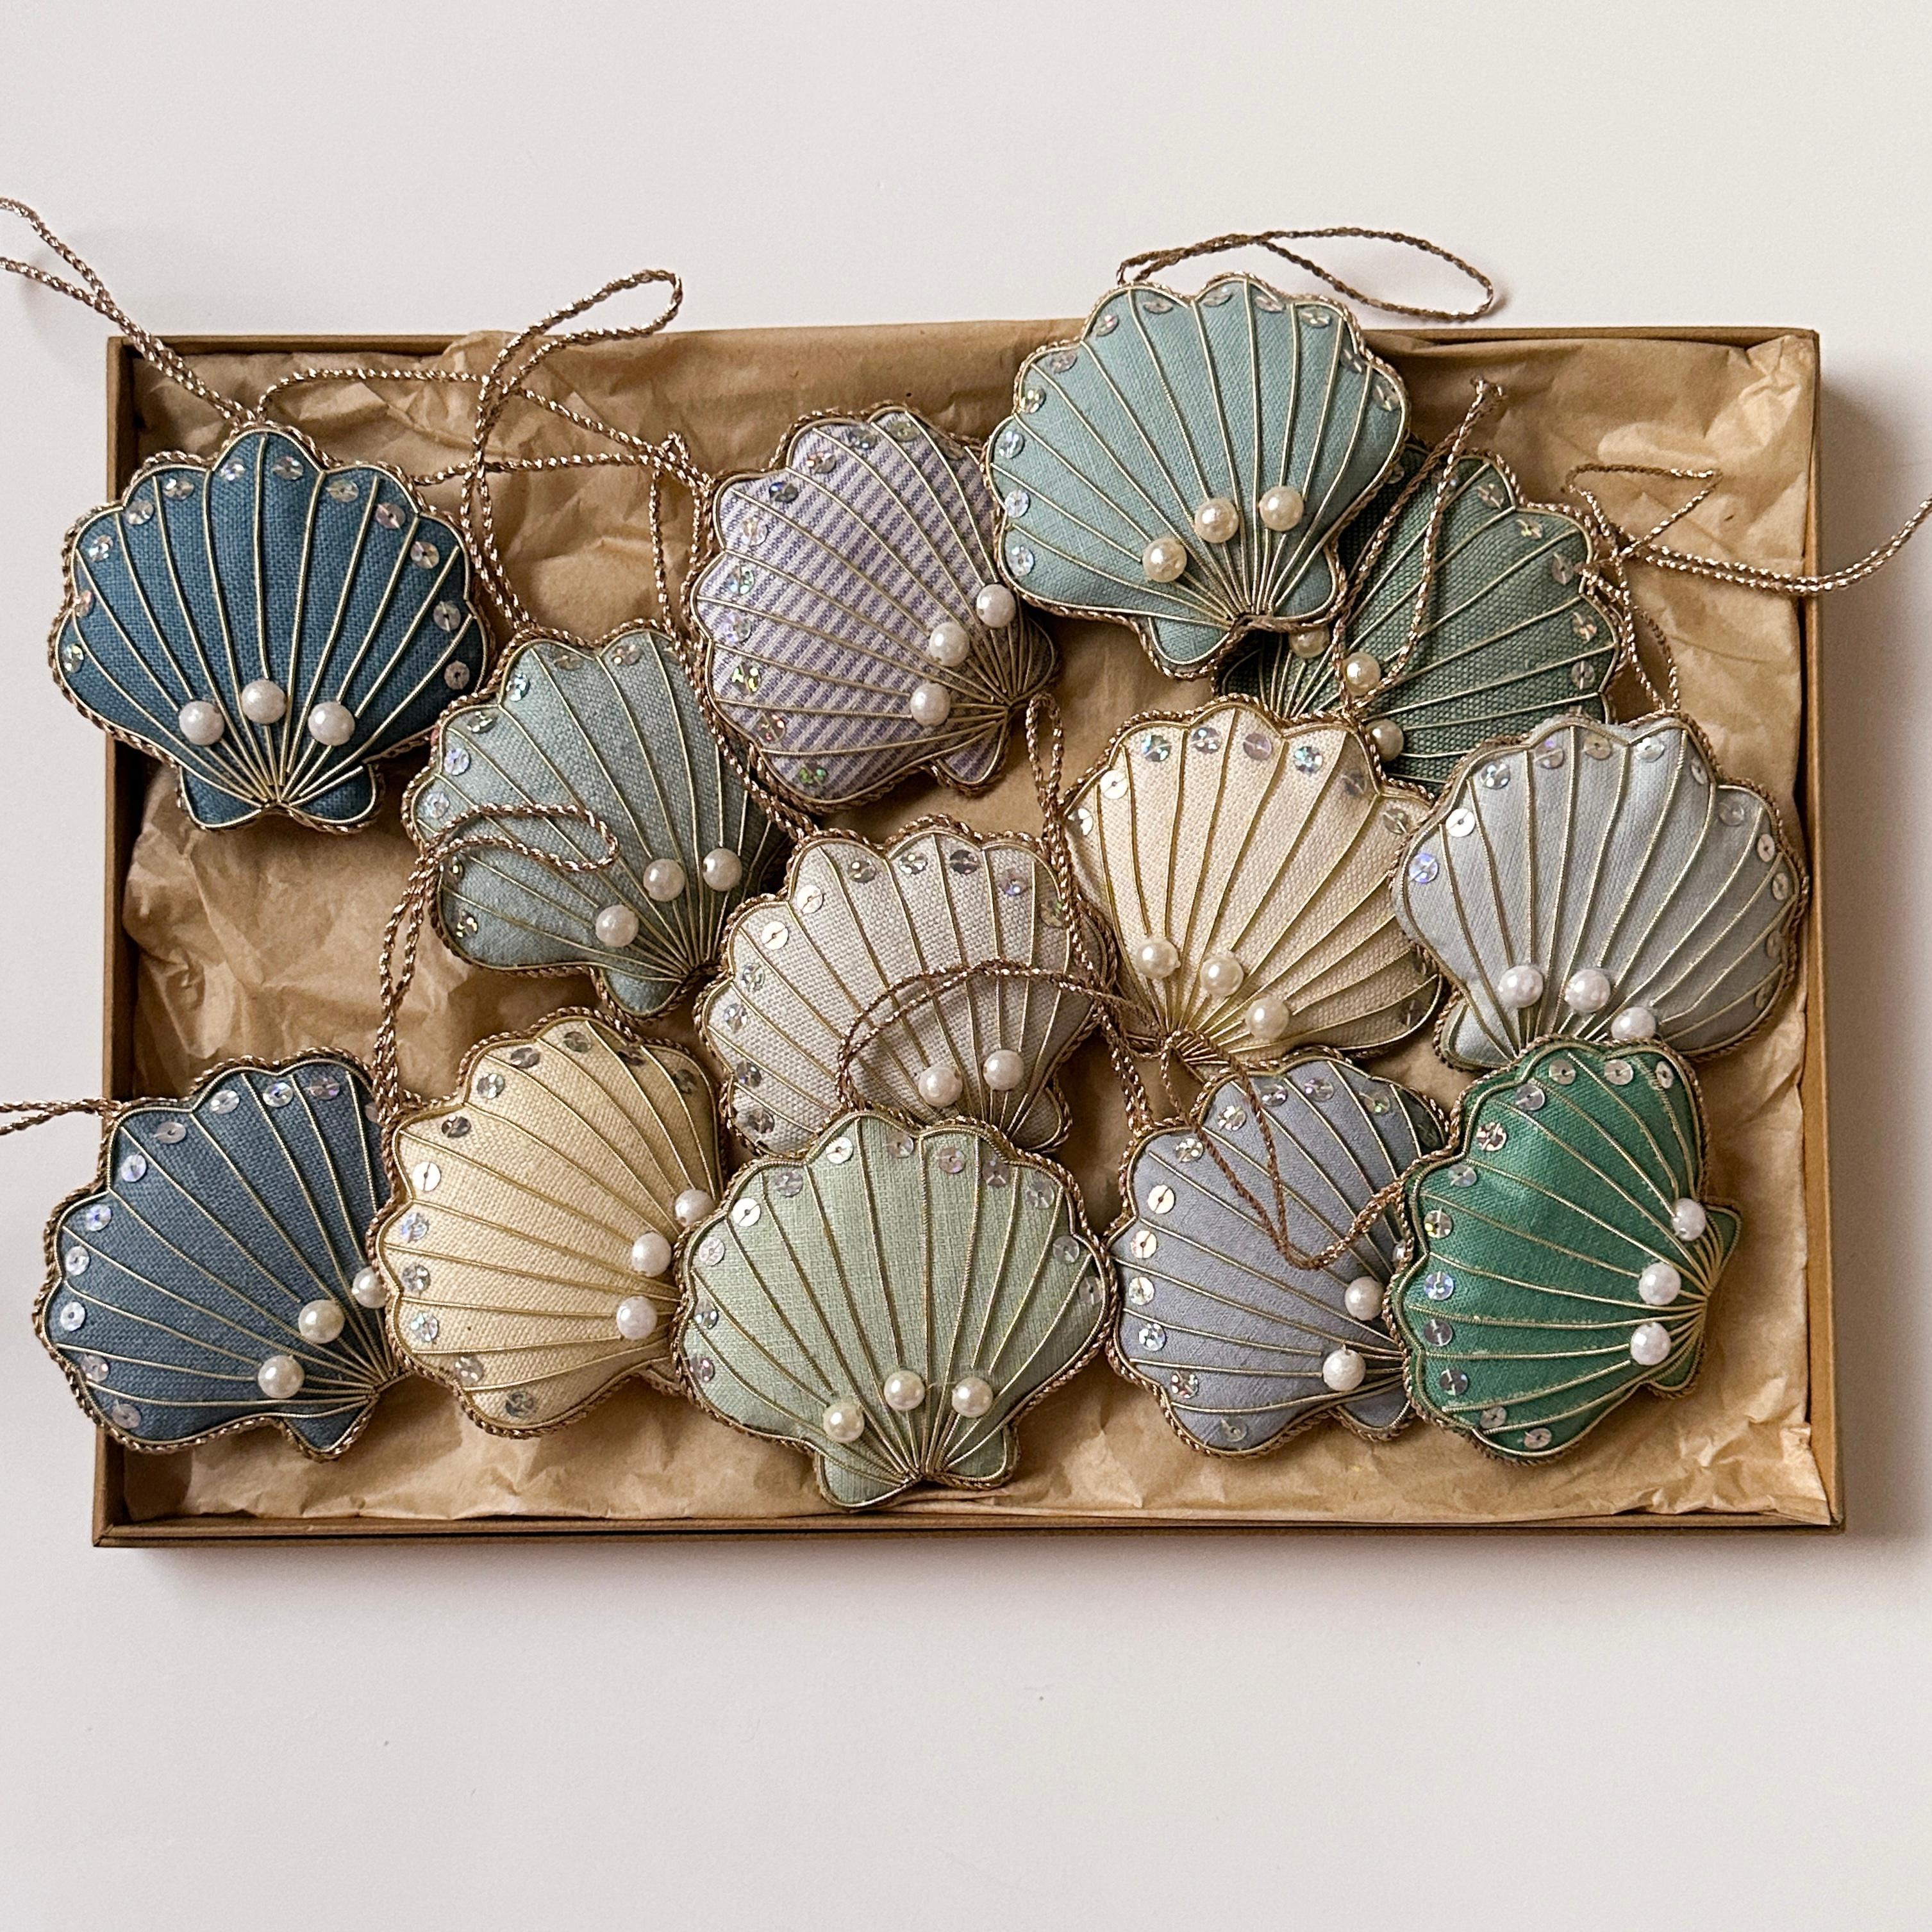 Set of 18 Limited Edition Artisan Vintage Blue Irish Linen Shell Ornaments Christmas Tree by Katie Larmour

This is a luxury box set of artisan made decorative ornaments created with authentic Irish Linen, exclusive to 1stdibs. They are special